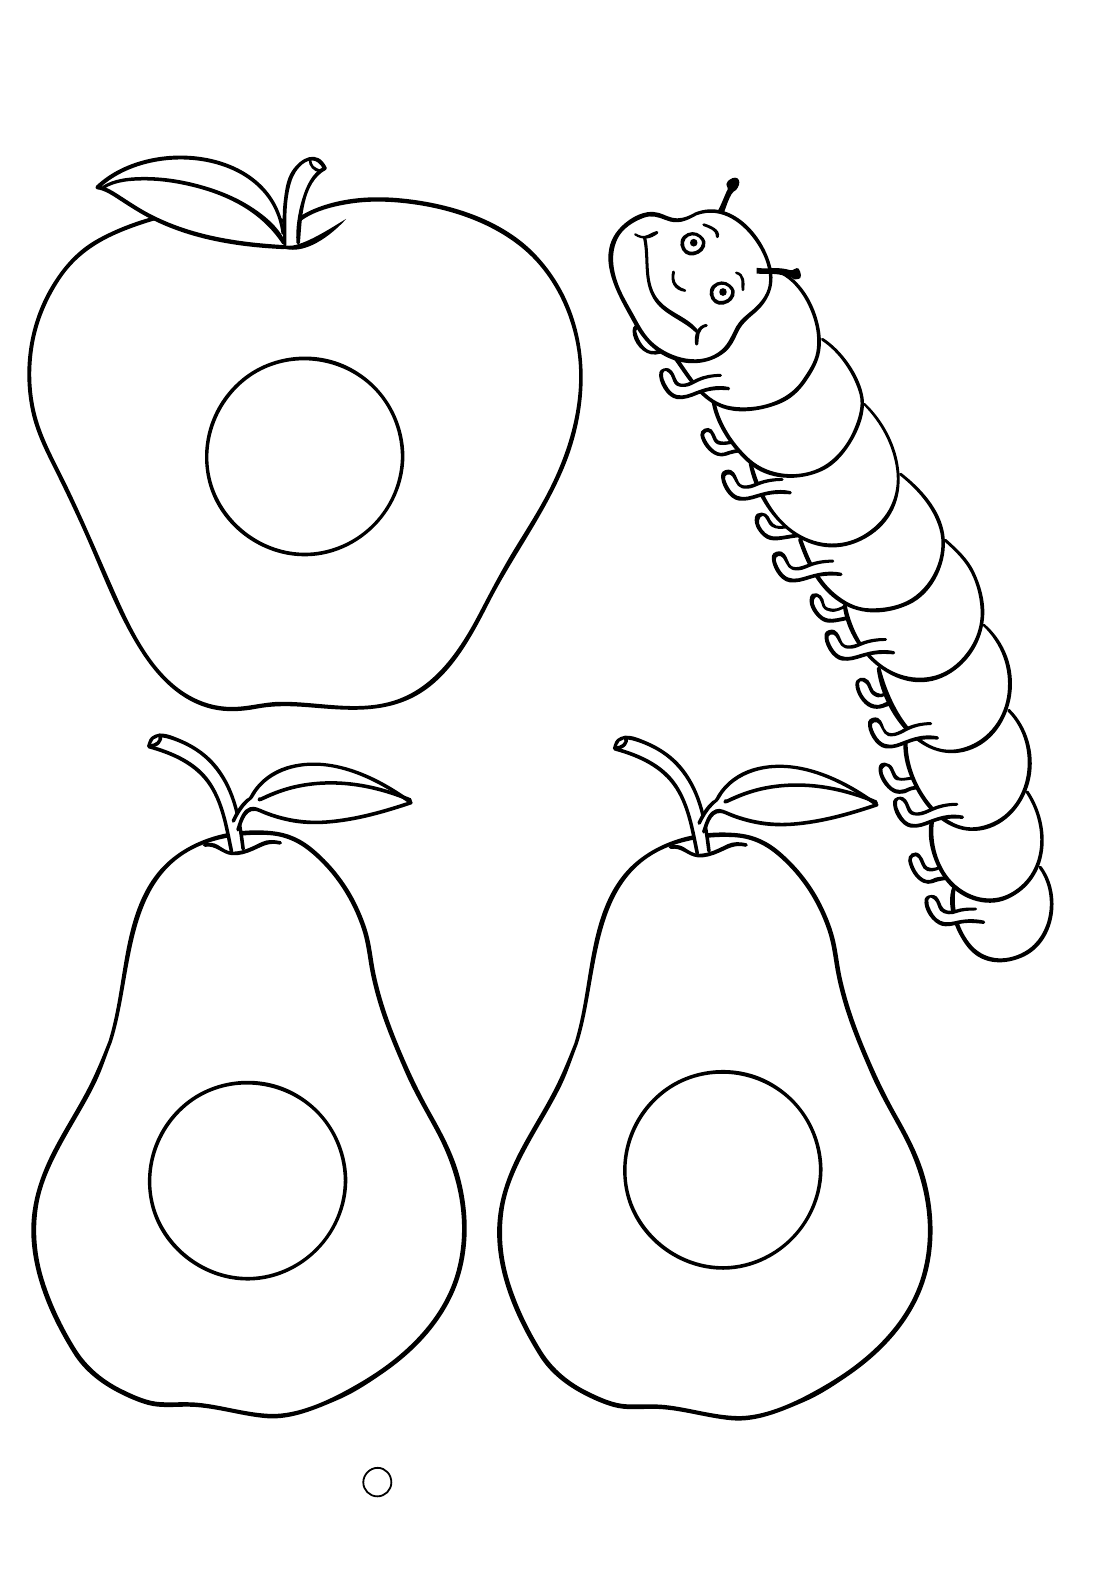 Very hungry caterpillar coloring pages to download and print for free